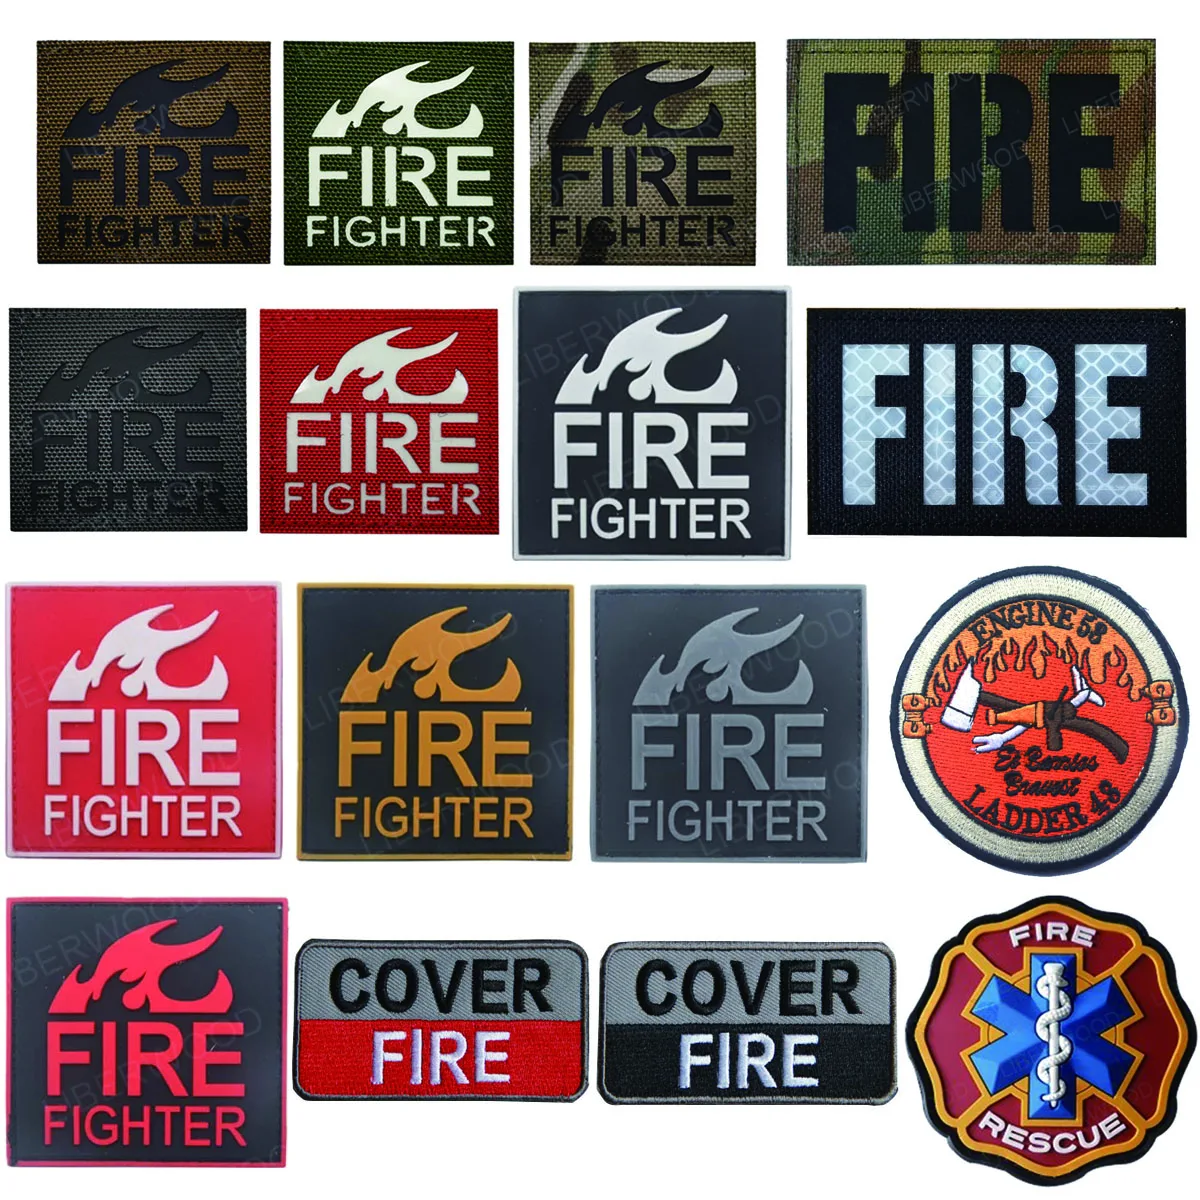 Reflective Fire Fighter Embroidered Patch Rescue Military Hook Glow in Dark Patches Medic Tactical Combat FIREFIGHTE PVC Badges